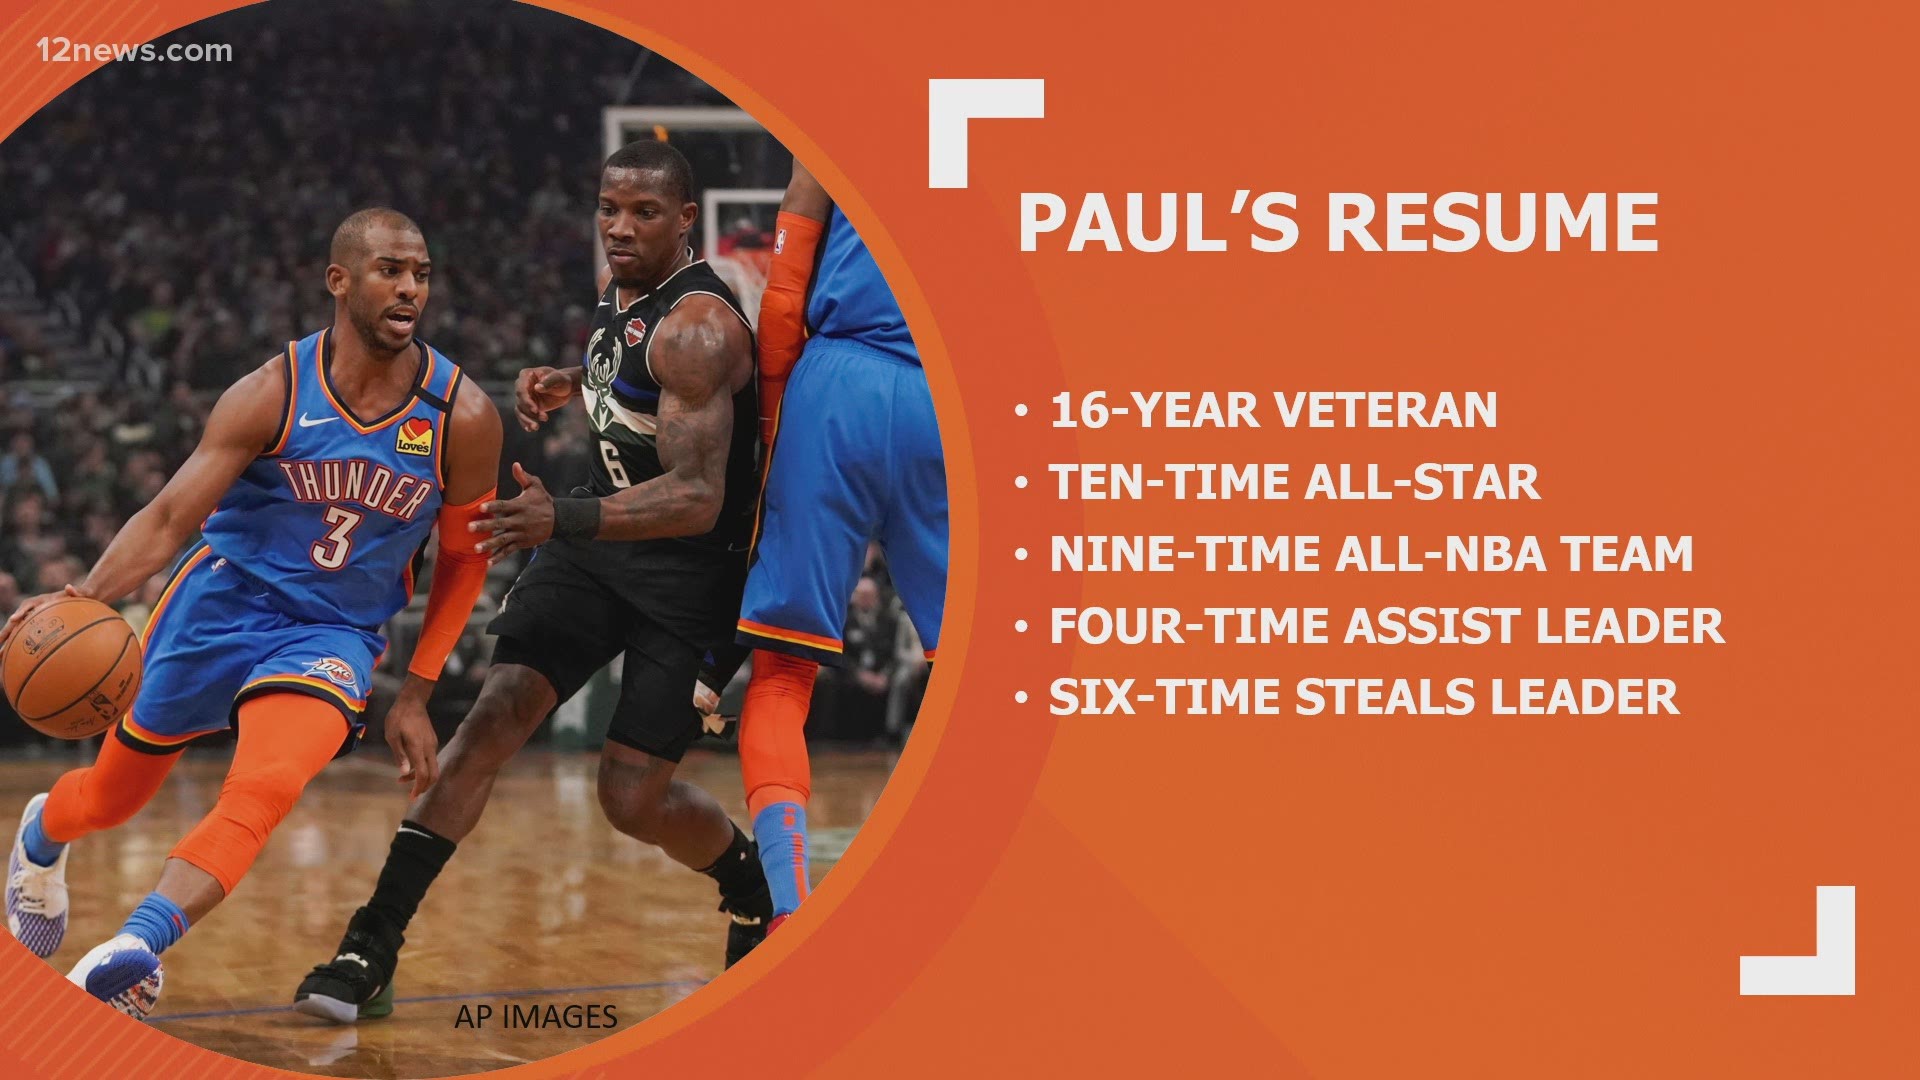 Could point guard Chris Paul be headed to the Phoenix Suns? Let us know what you think.